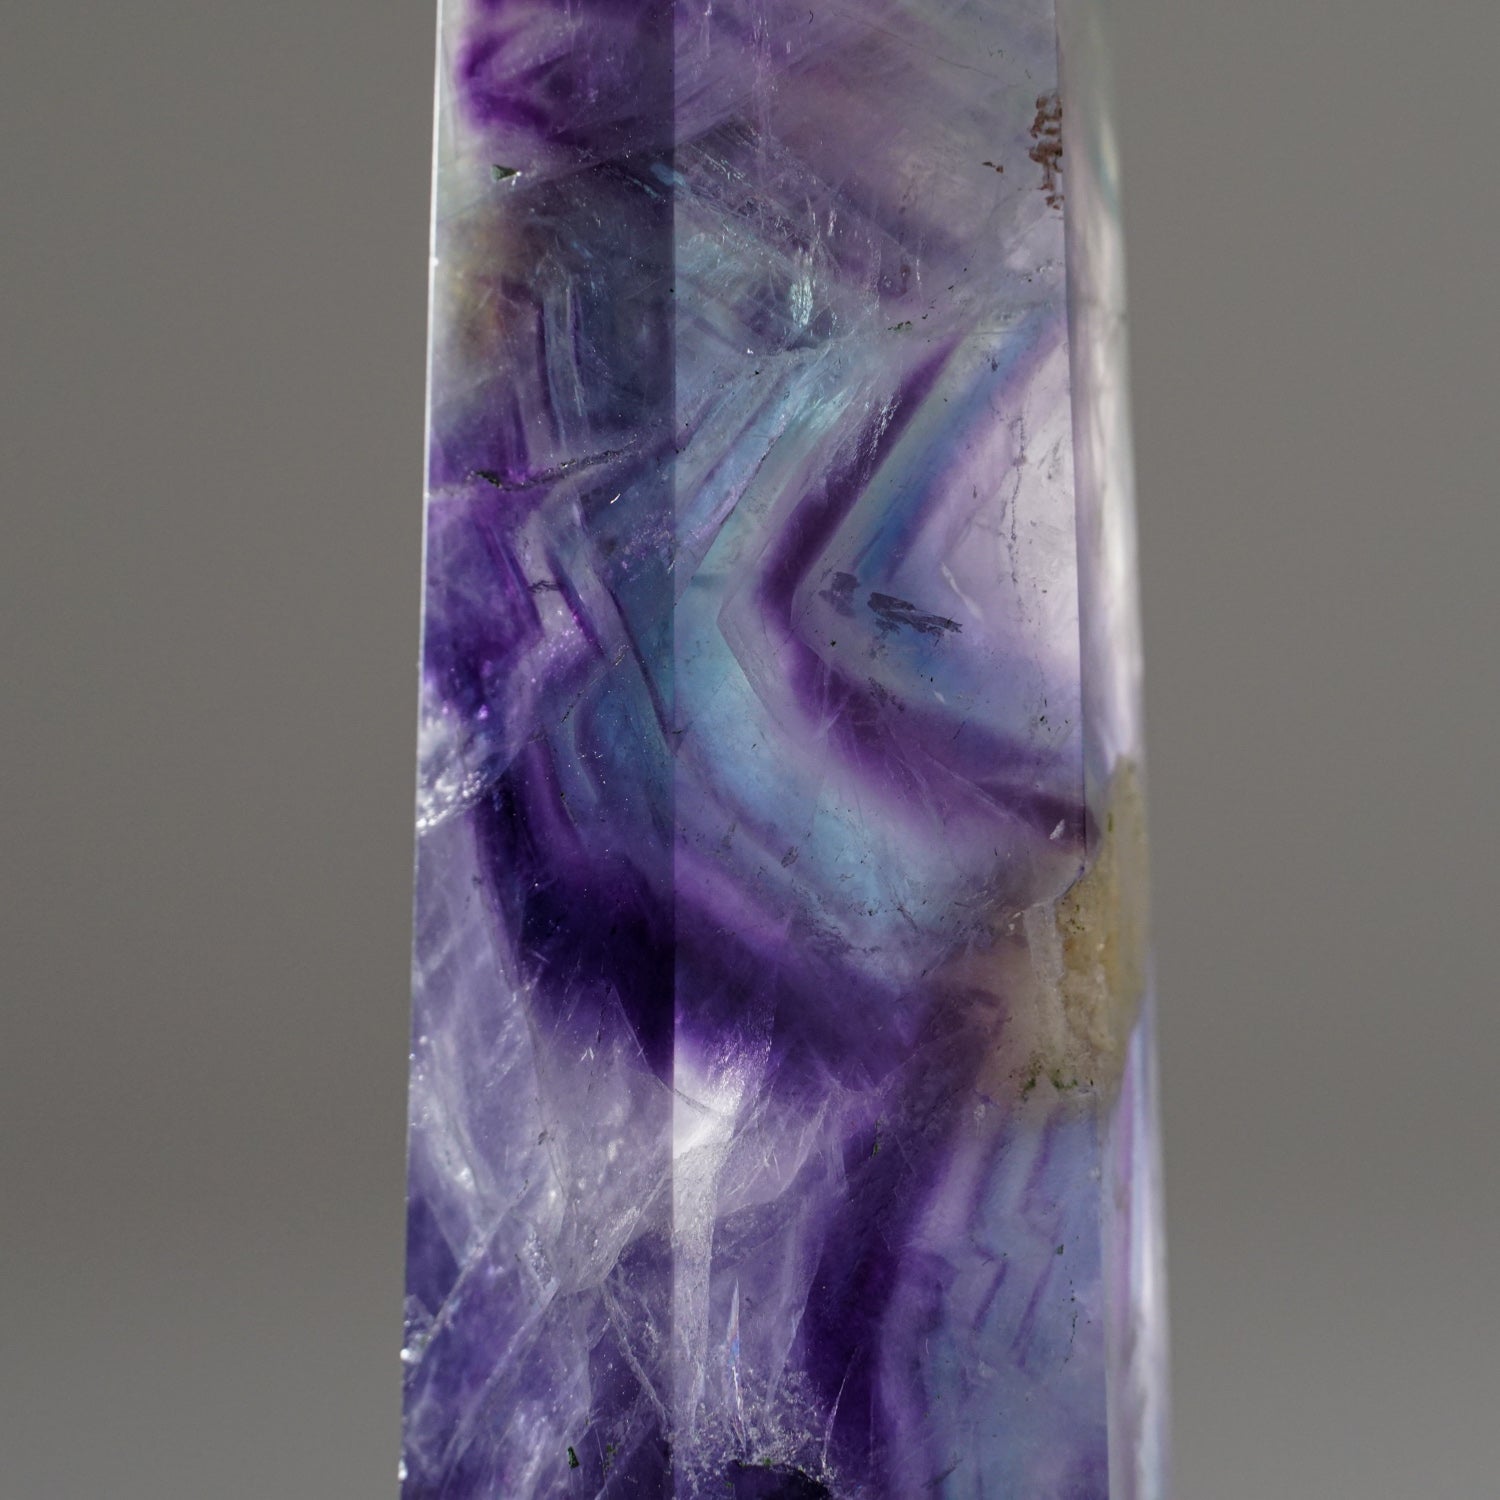 Polished Rainbow Fluorite Point From Mexico (282.7 grams)